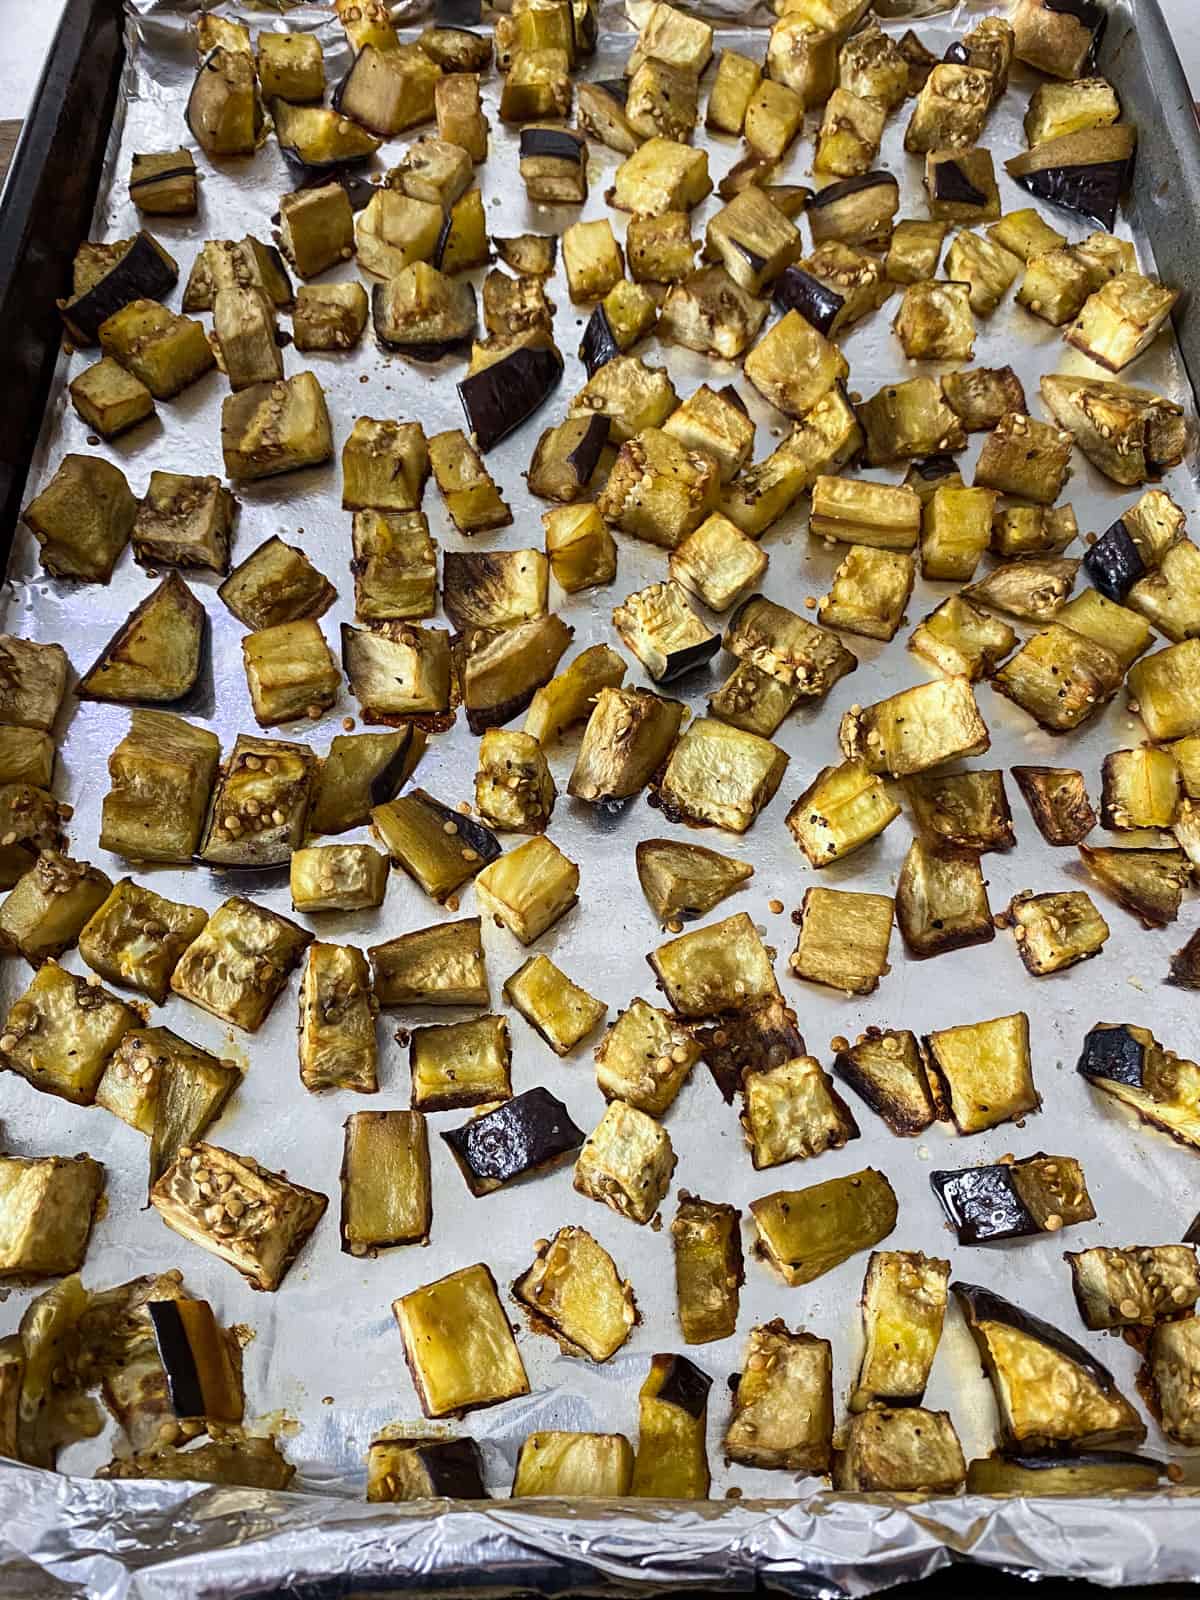 Roast the eggplant cubes until soft and slightly caramelized.